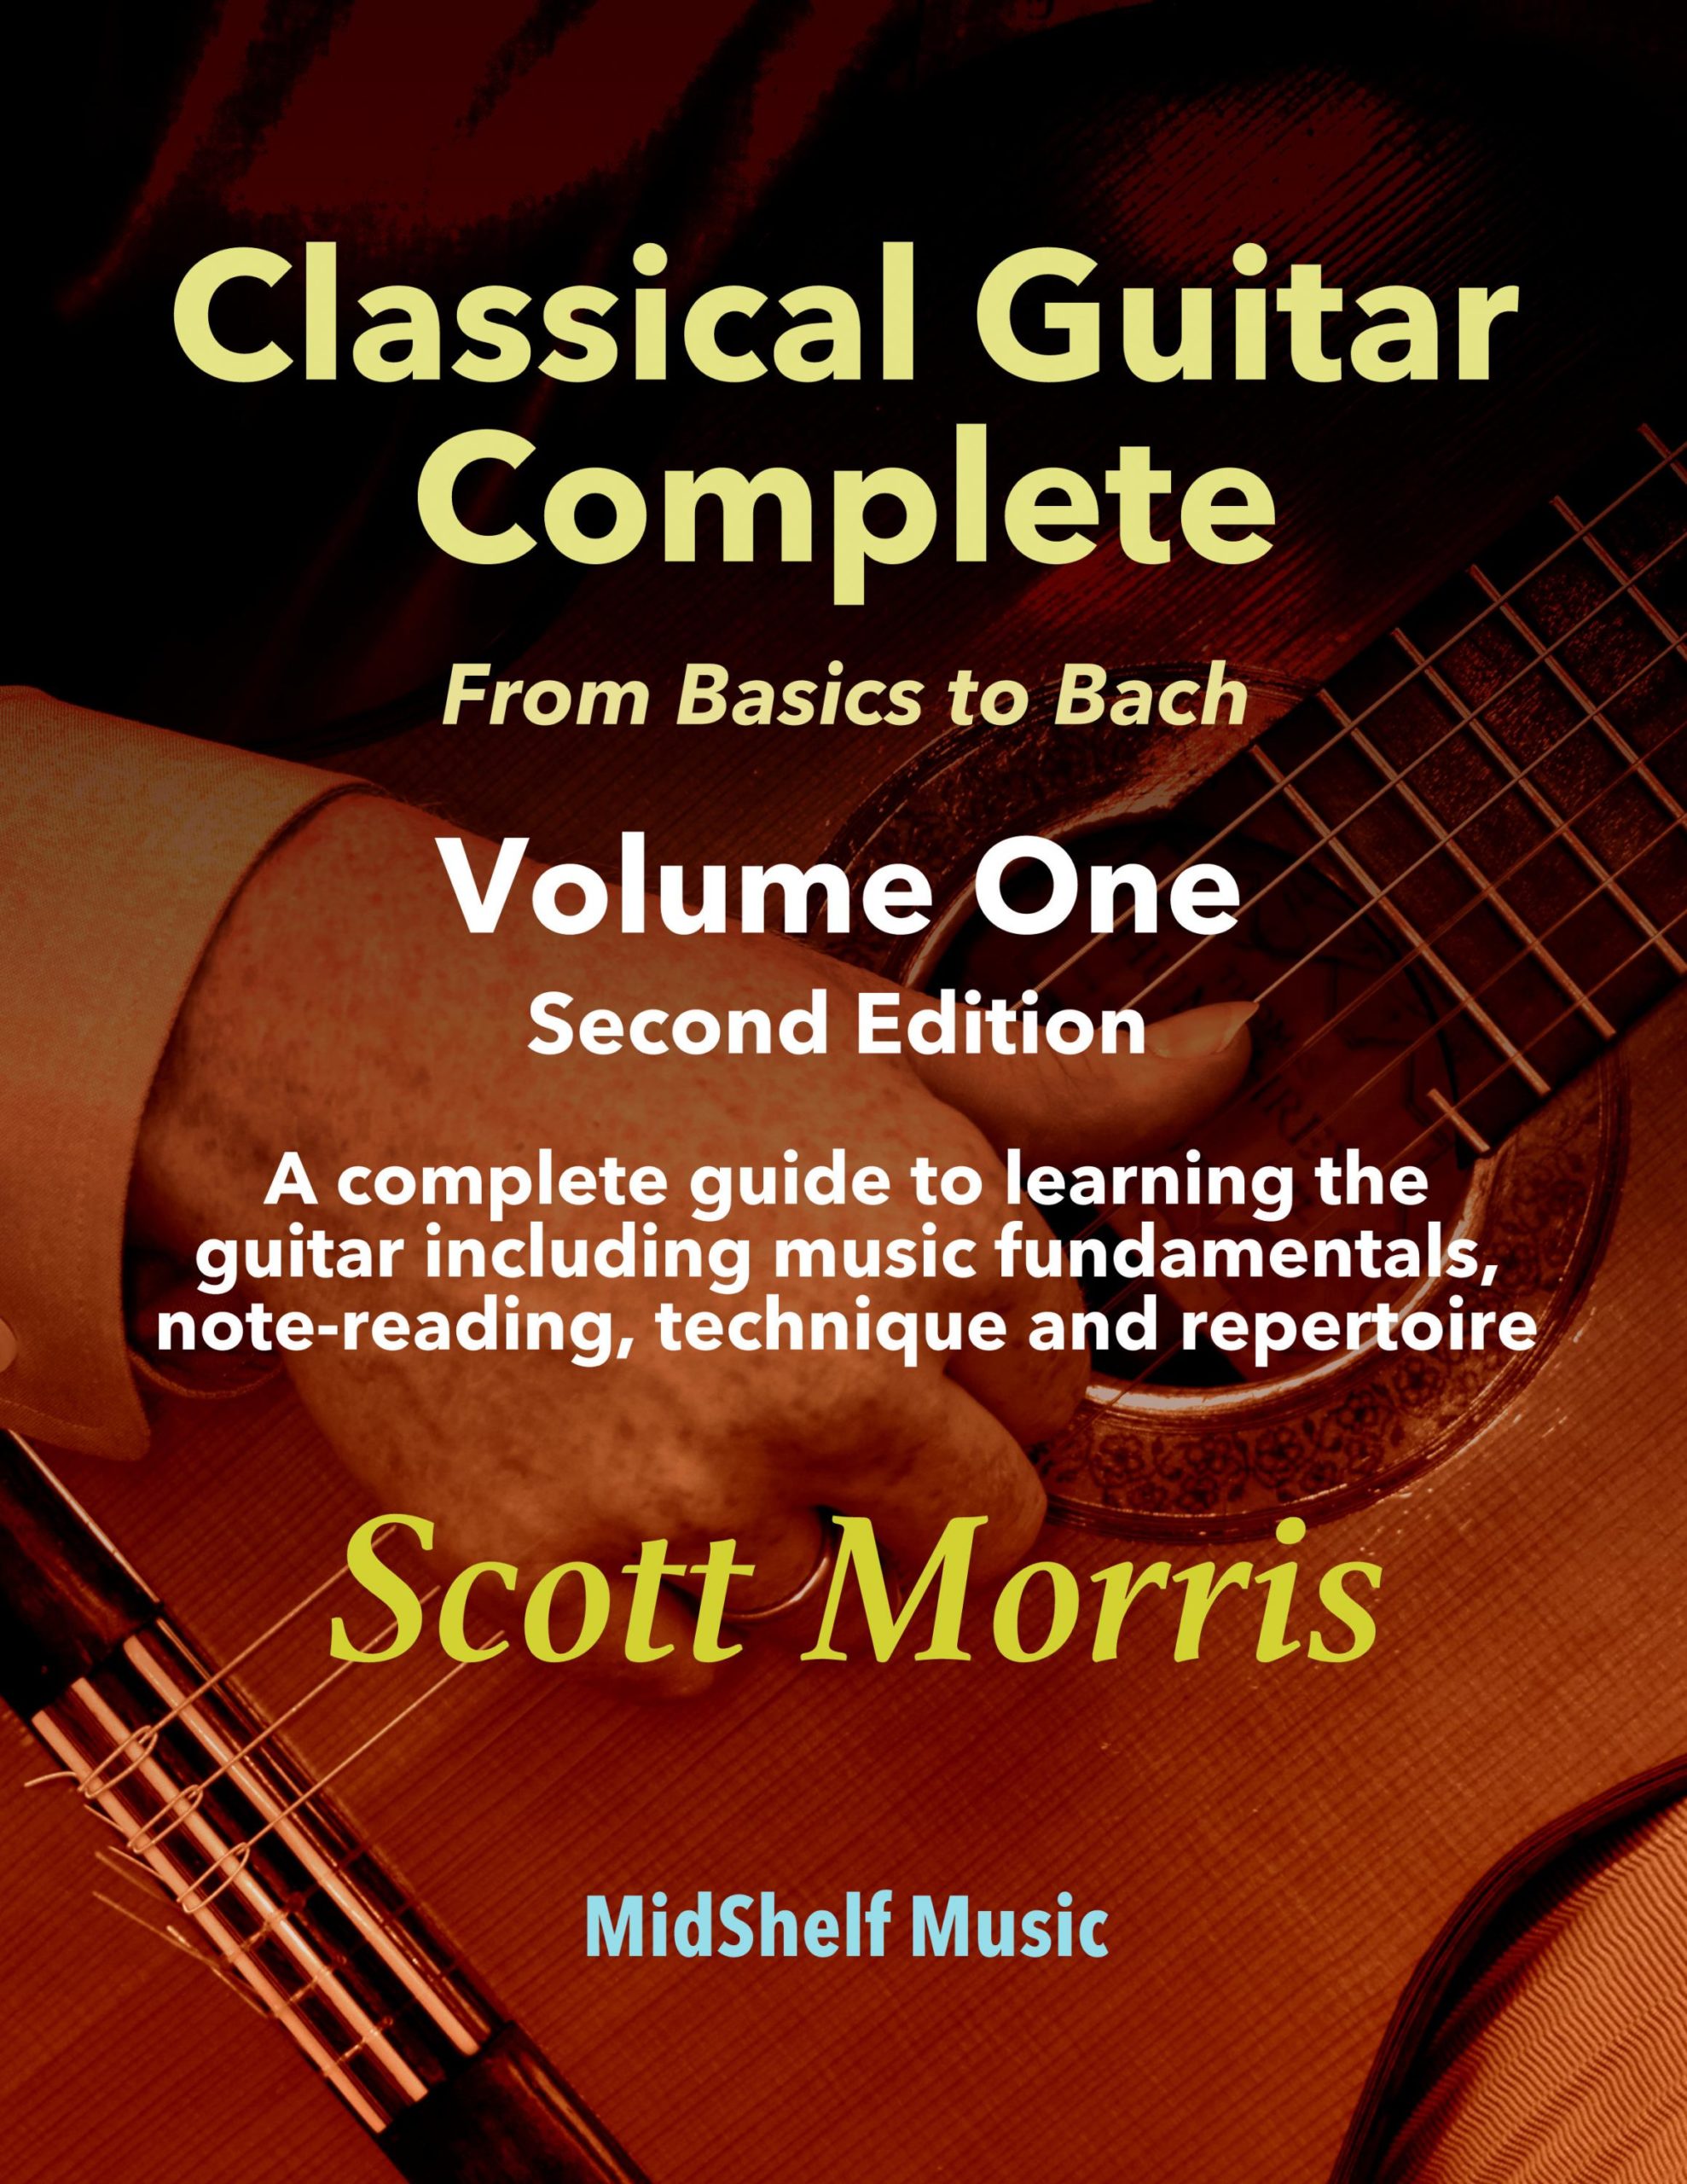 Classical Guitar Complete - Volume 1, 2nd Edition (w/CD)